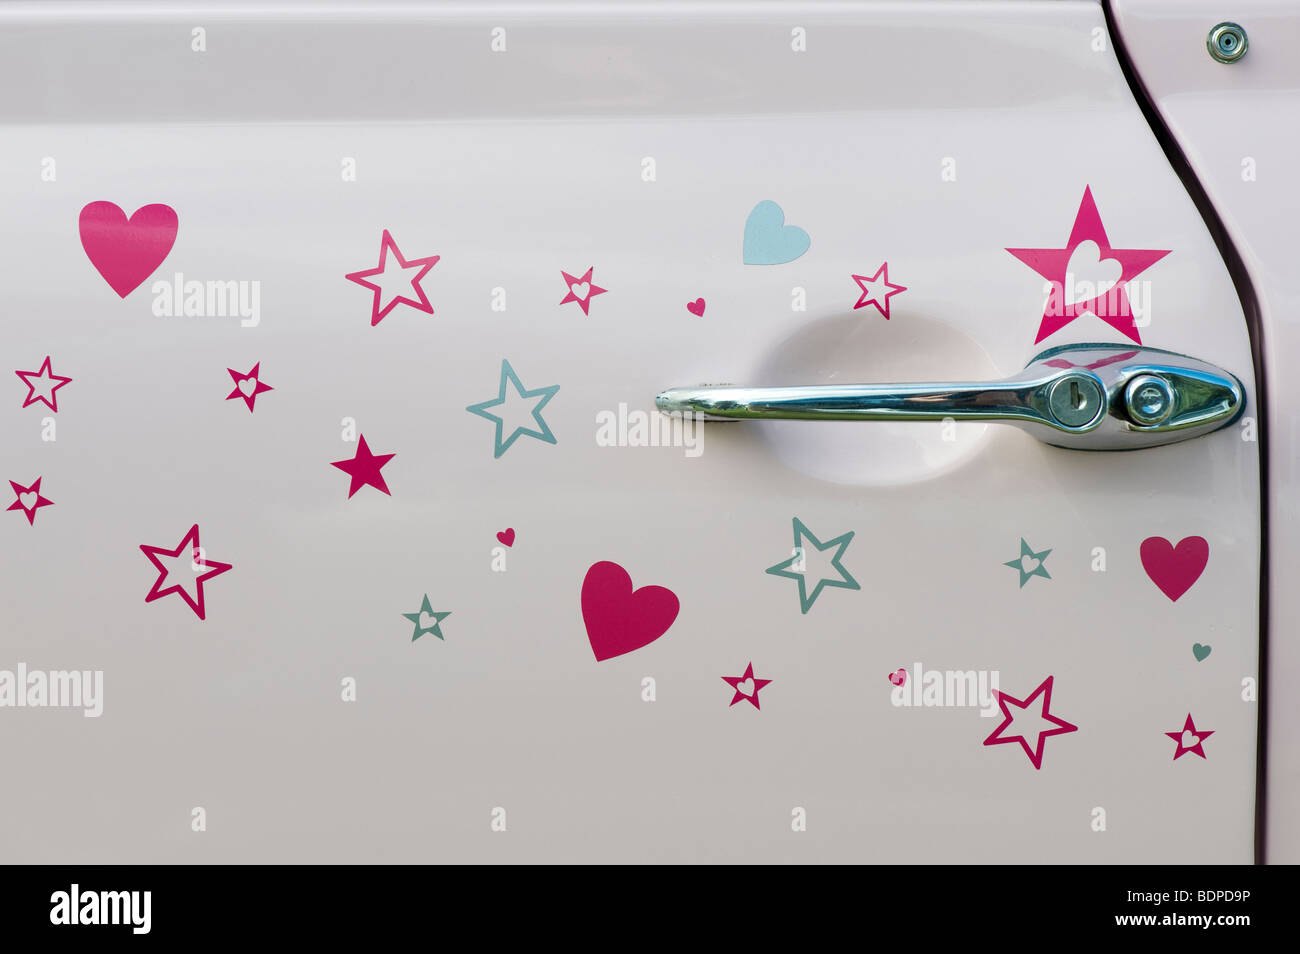 Pink Austin Mini door with pink stars and love hearts Stock Photo